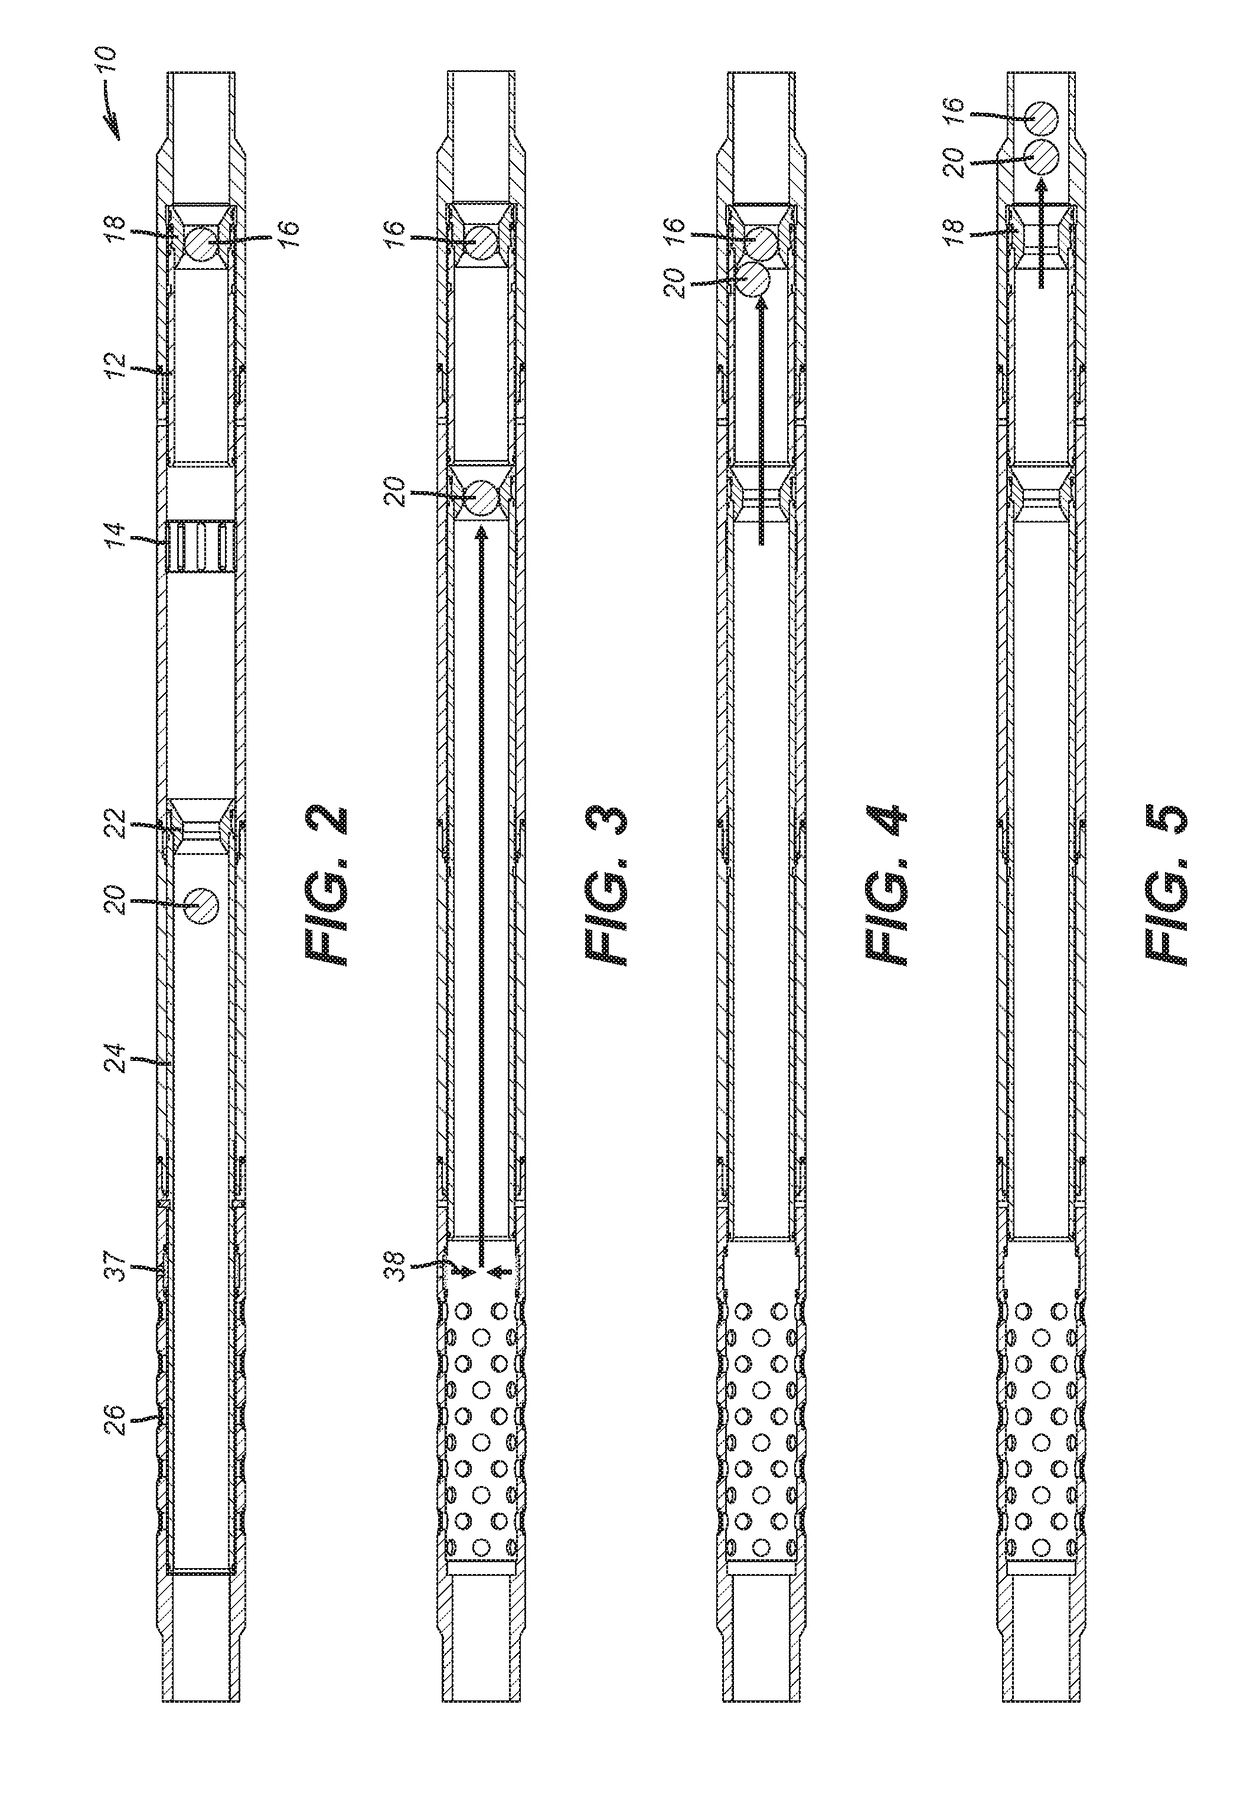 Sliding Sleeve Valve with Degradable Component Responsive to Material Released with Operation of the Sliding Sleeve